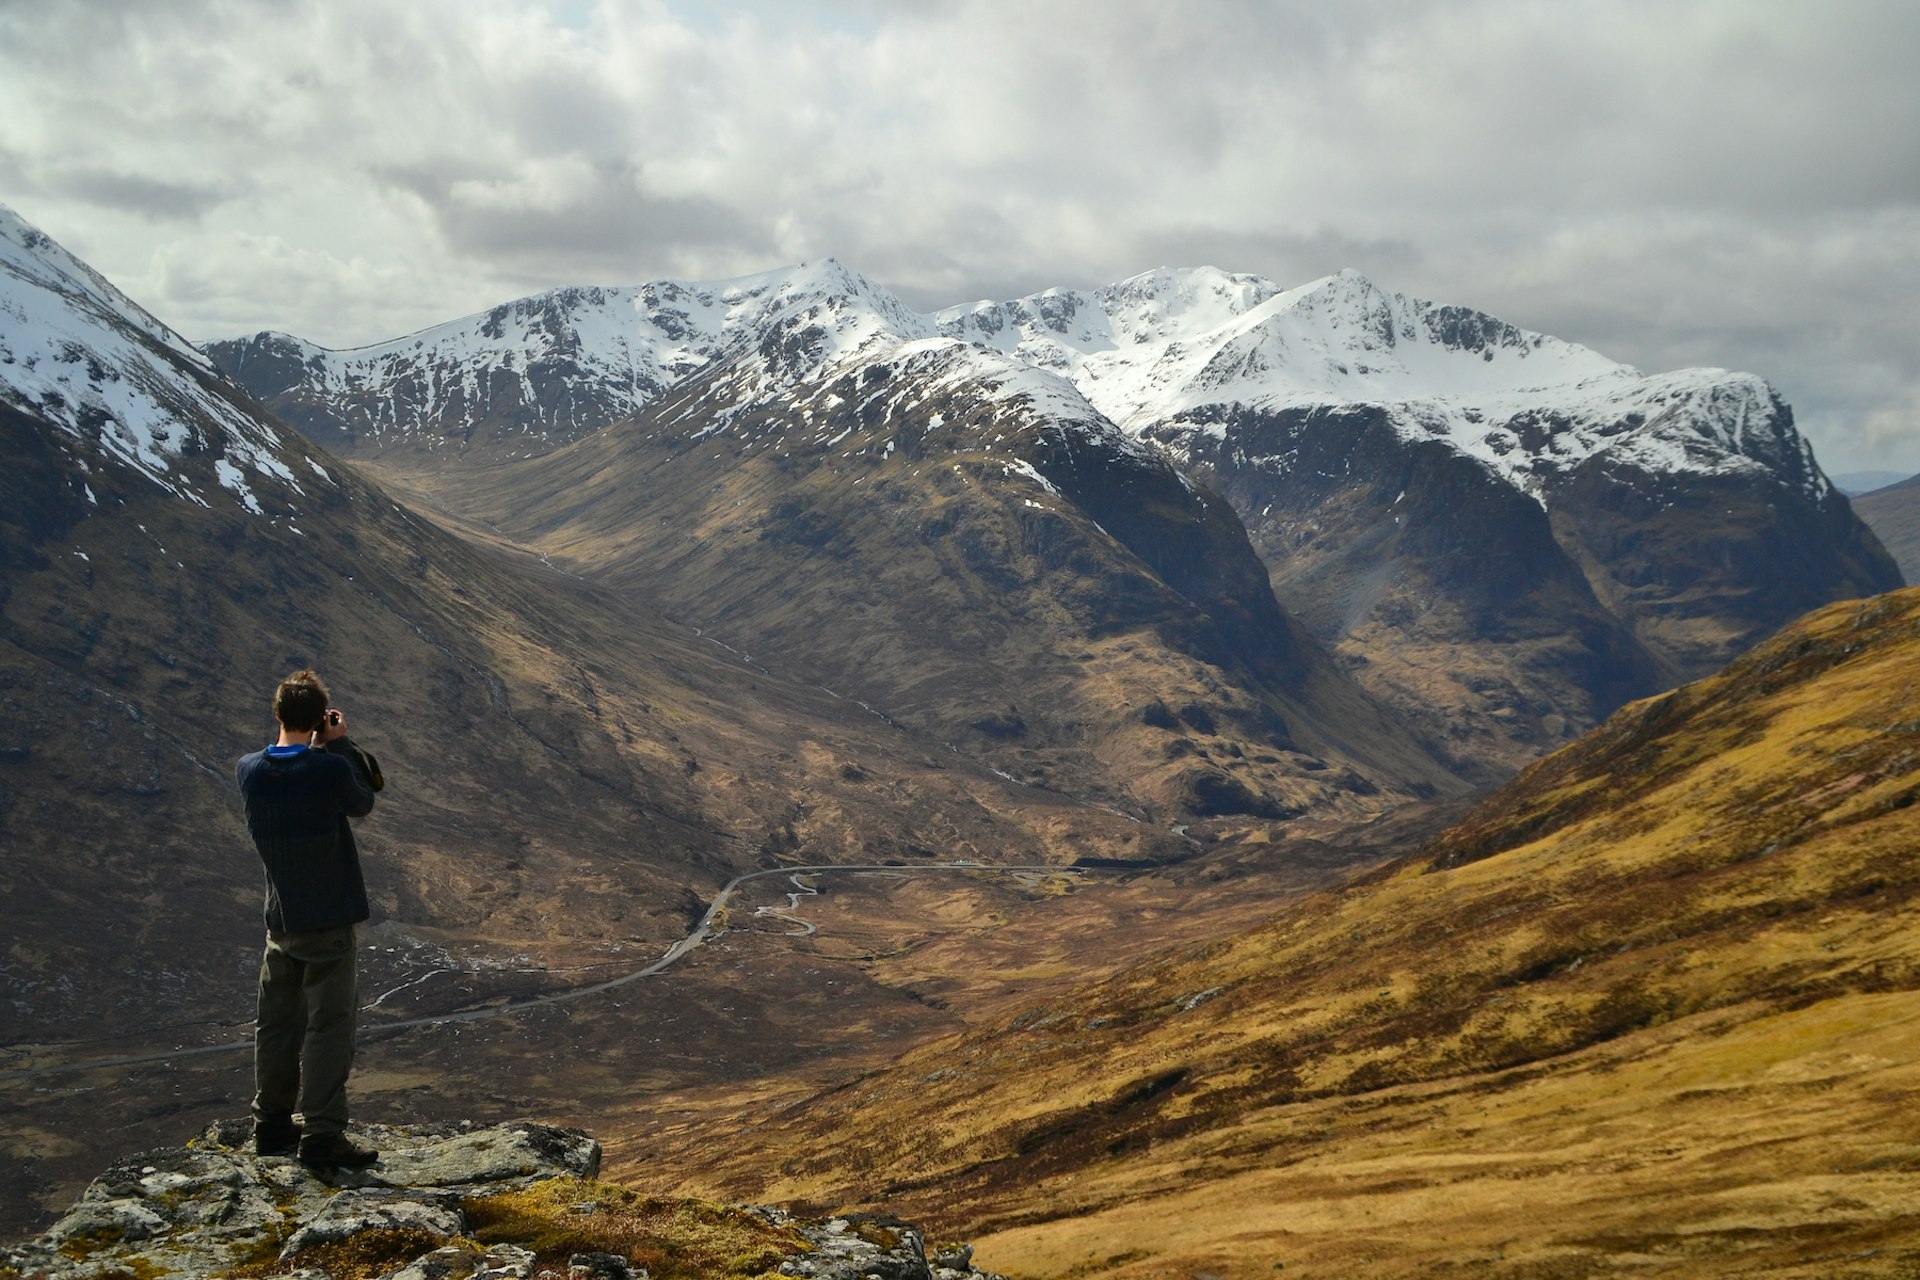 A man takes a photo of a vista of snow-capped mountains on the West Highland Way, Scotland, United Kingdom